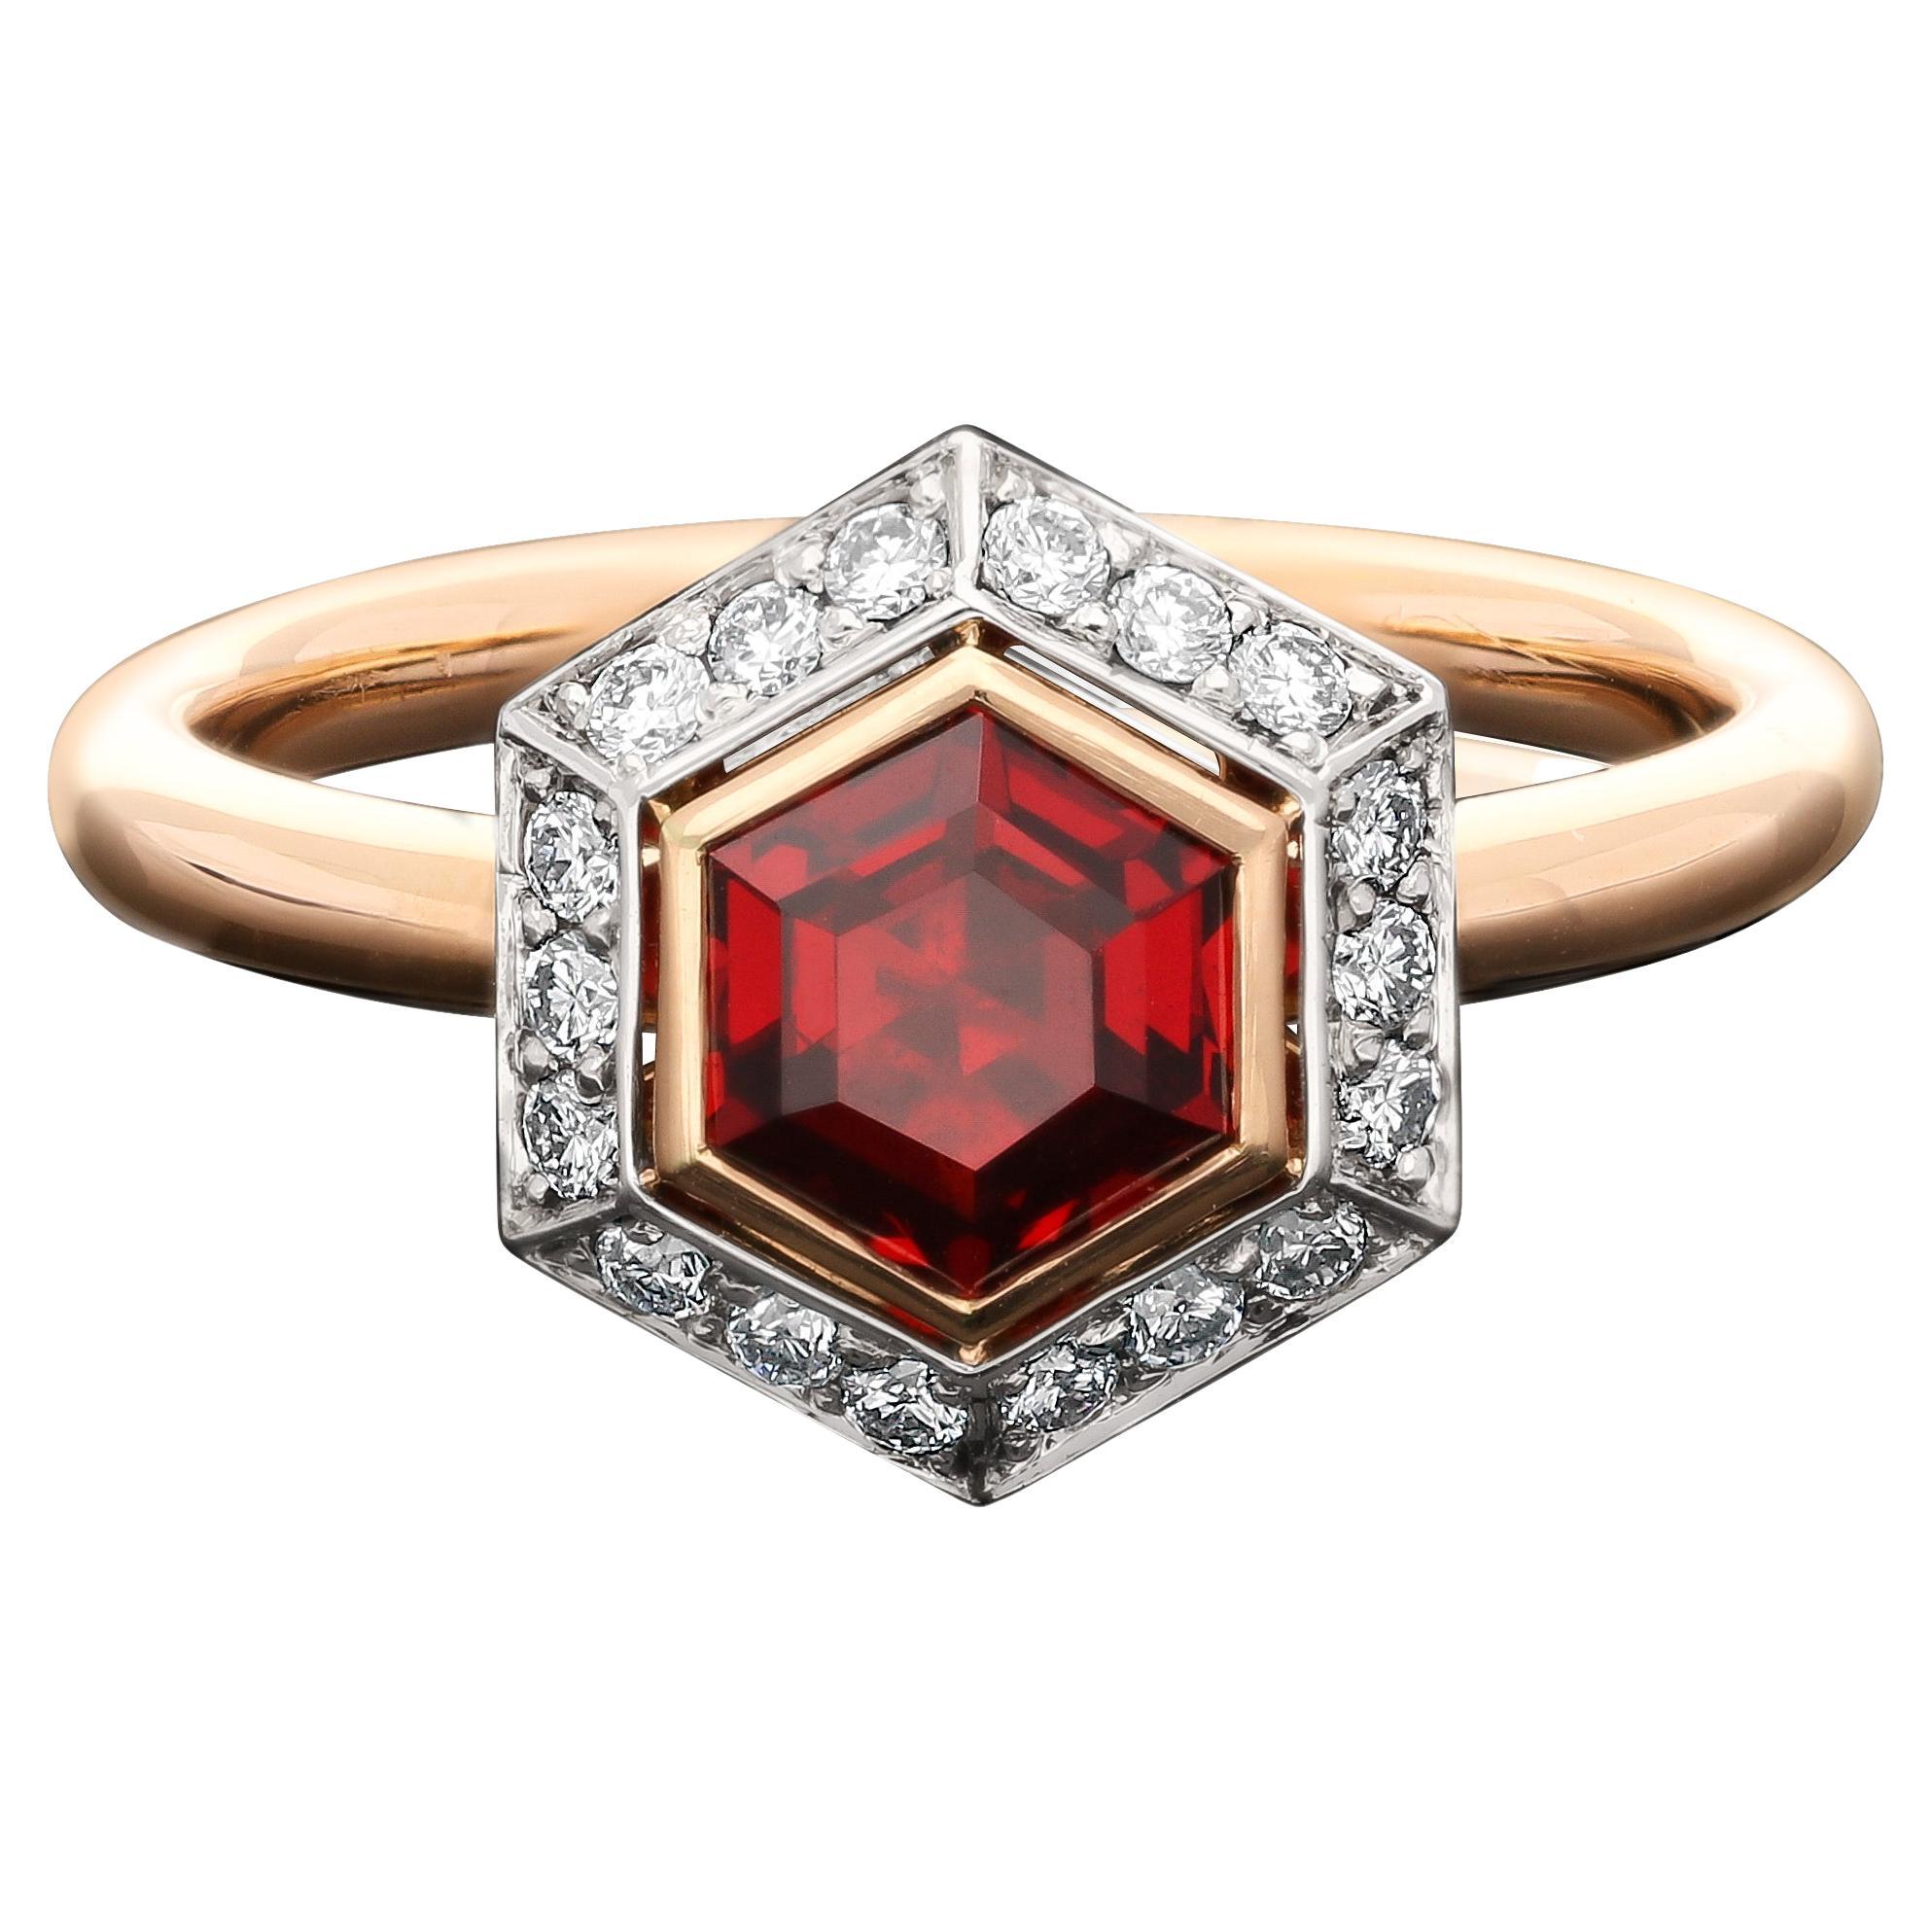 Hancocks 0.92ct Vivid Red Burmese Spinel Ring with Diamond Surround Rose Gold For Sale